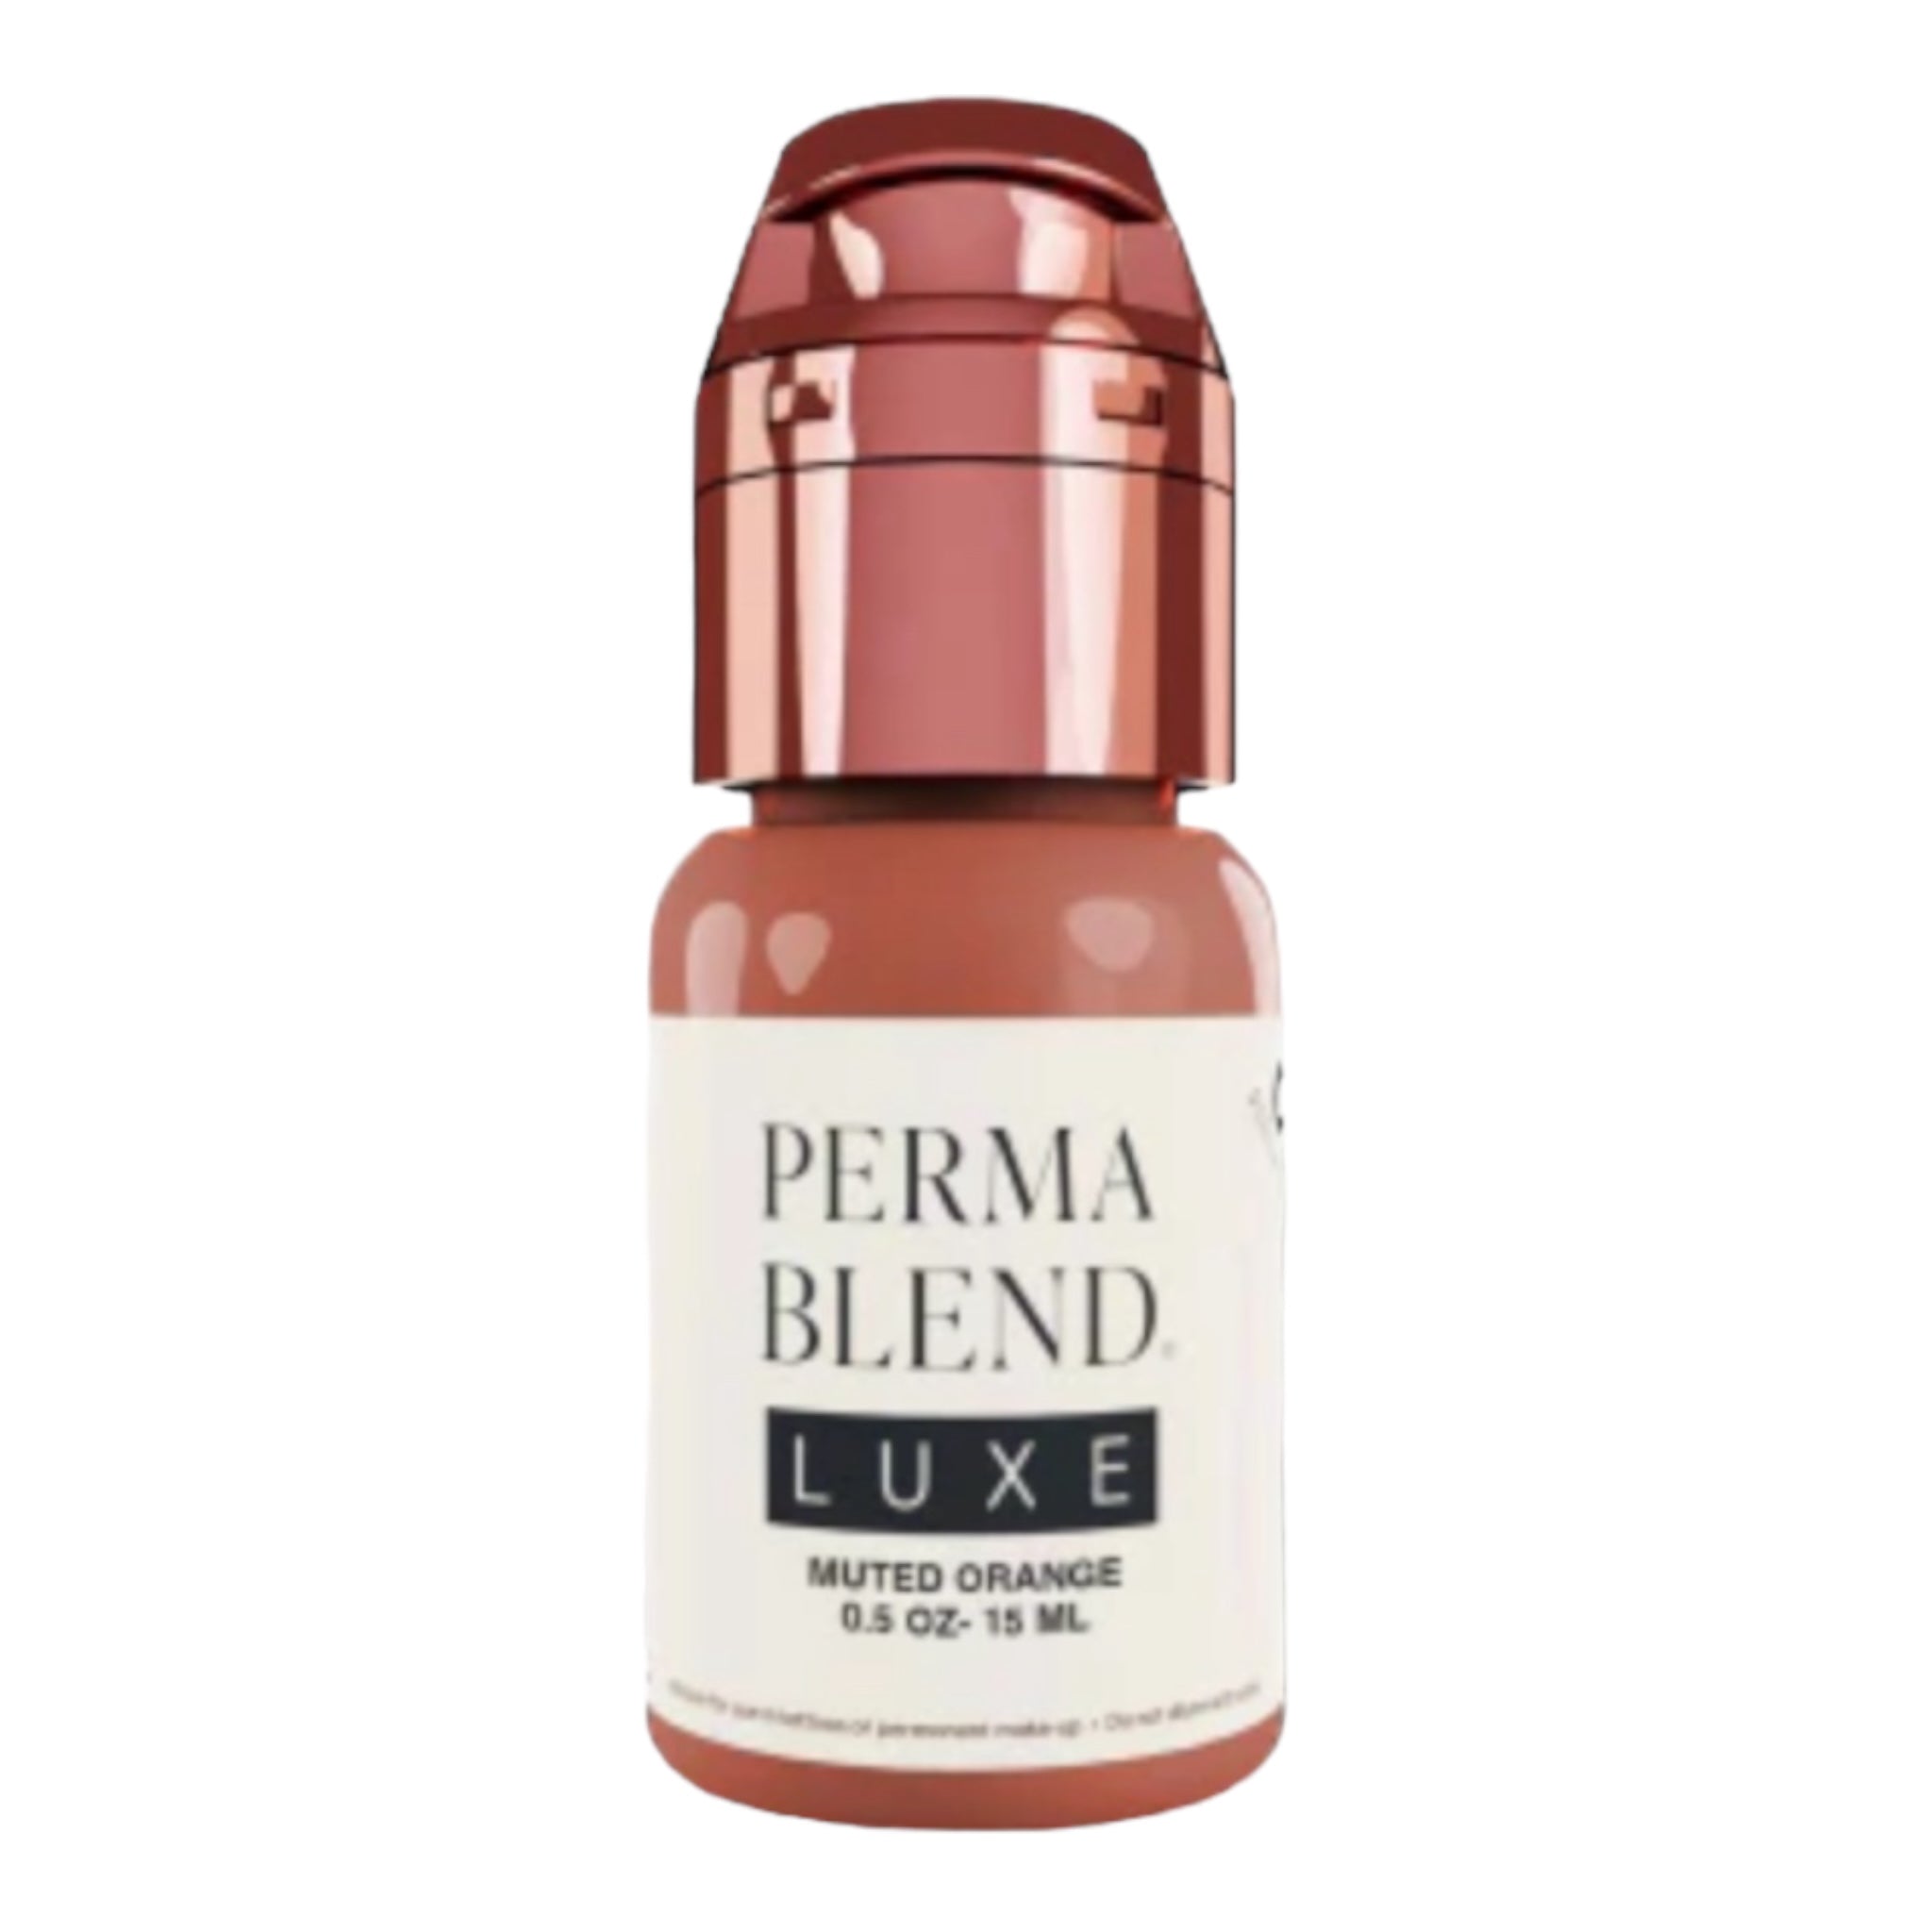 Encre Maquillage Perma Blend Luxe 15ml - Muted Orange